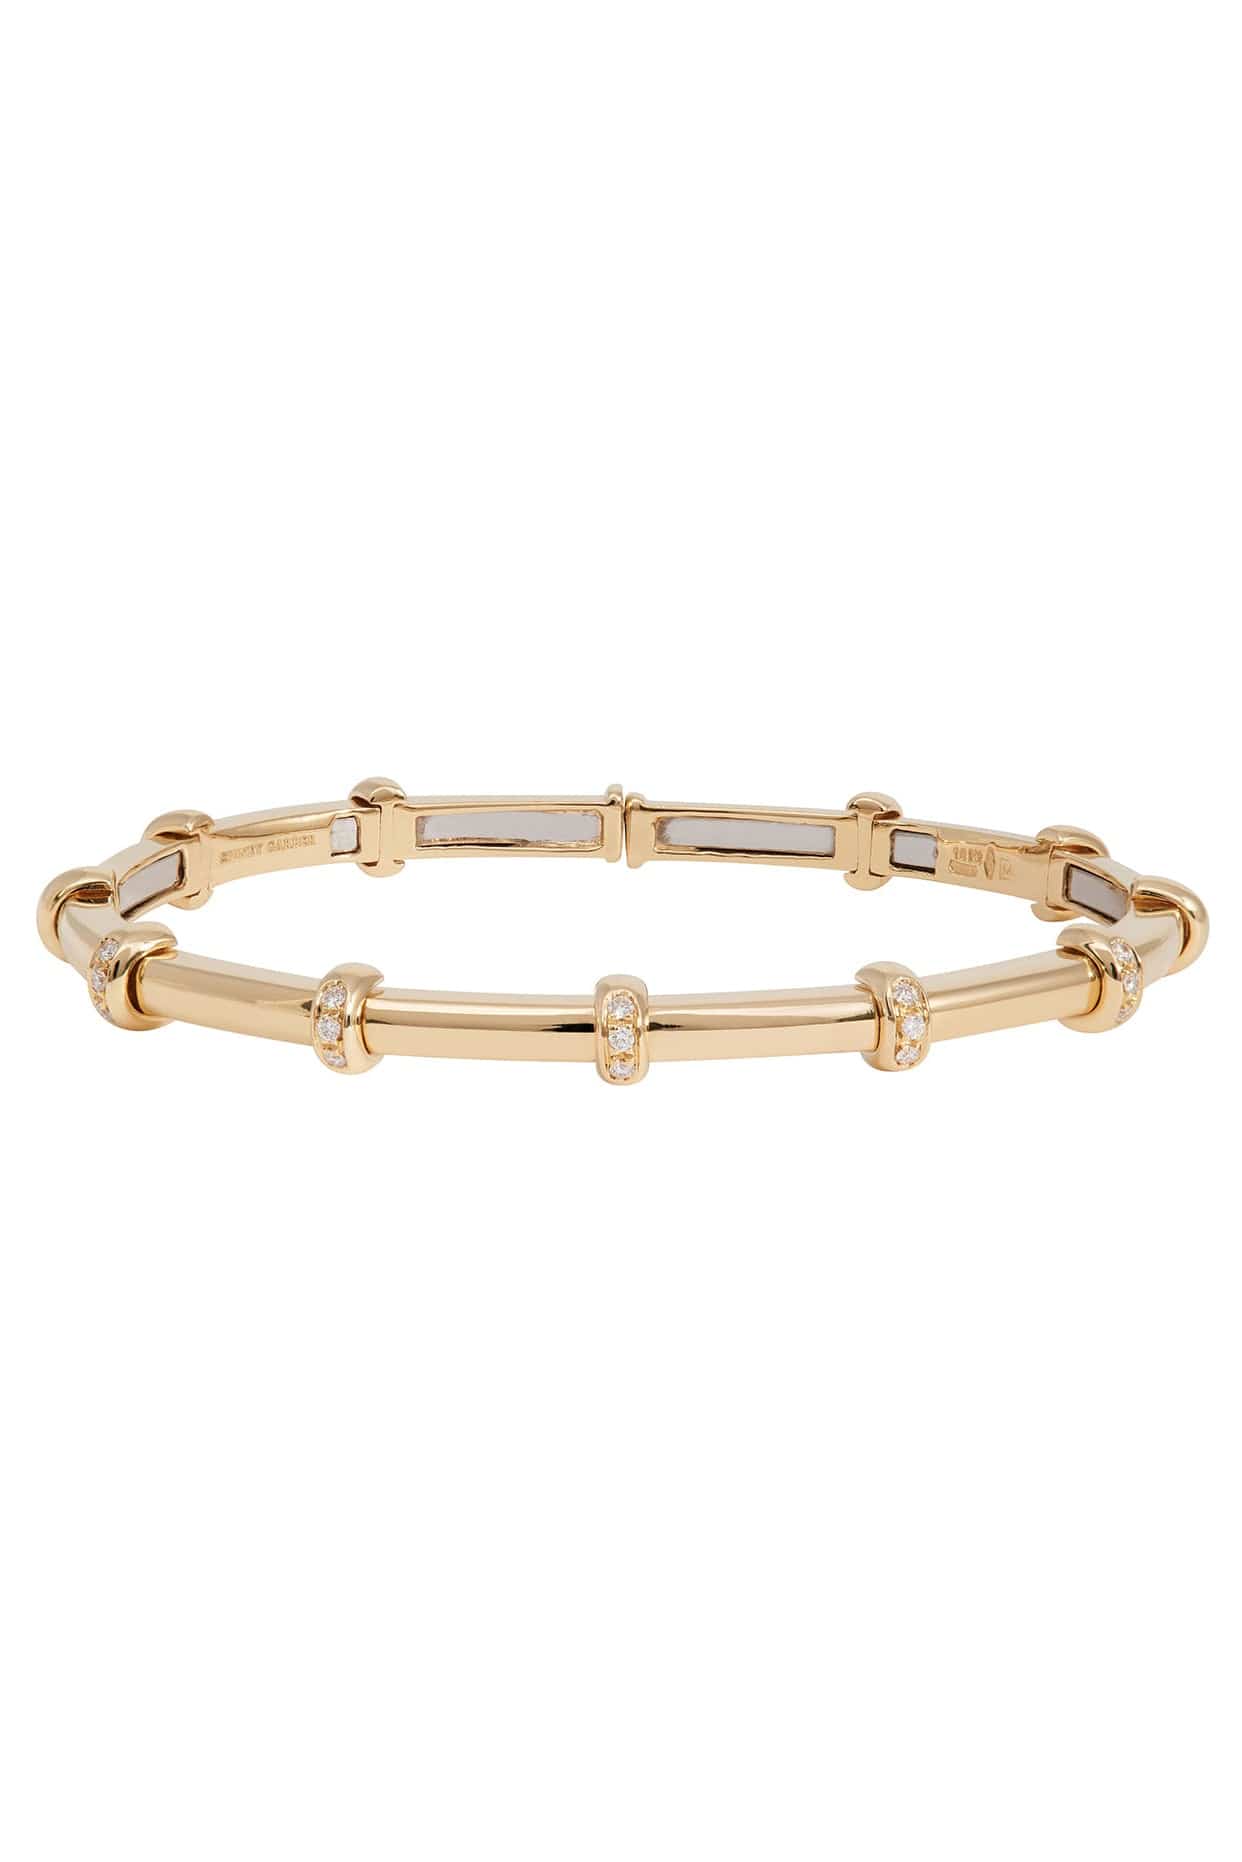 SIDNEY GARBER-Carly Bracelet - Yellow Gold-YELLOW GOLD